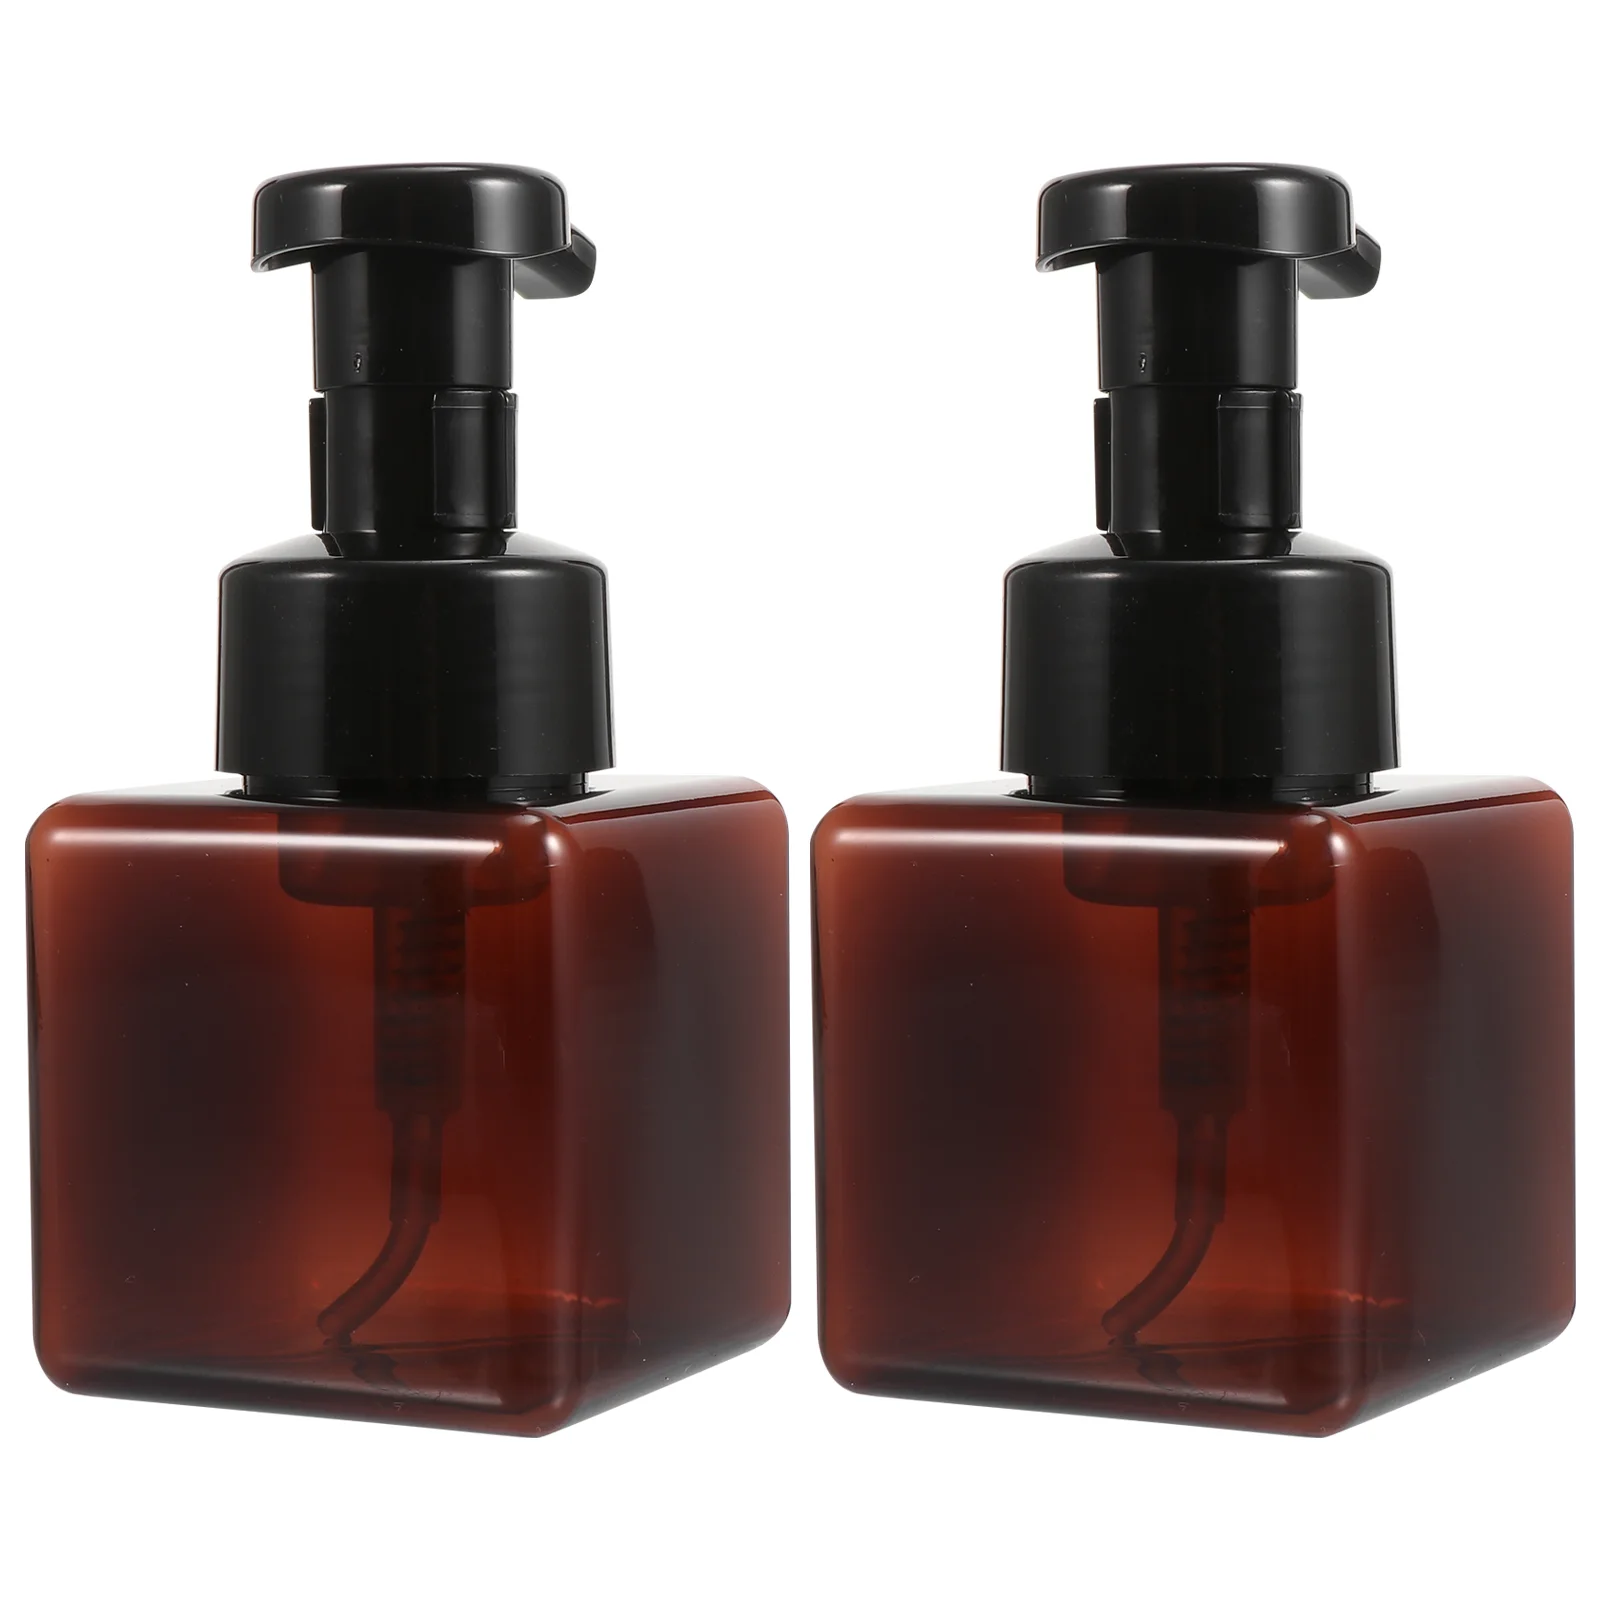 Hand Soap Dispenser Foaming Hand Bottle: 2pcs 250ml Lotion Cleanser Dispenser Pump Container for Bathroom Vanities Kitchen Brown 2pcs kitchen install tap water purifier activated carbon filter water filter element